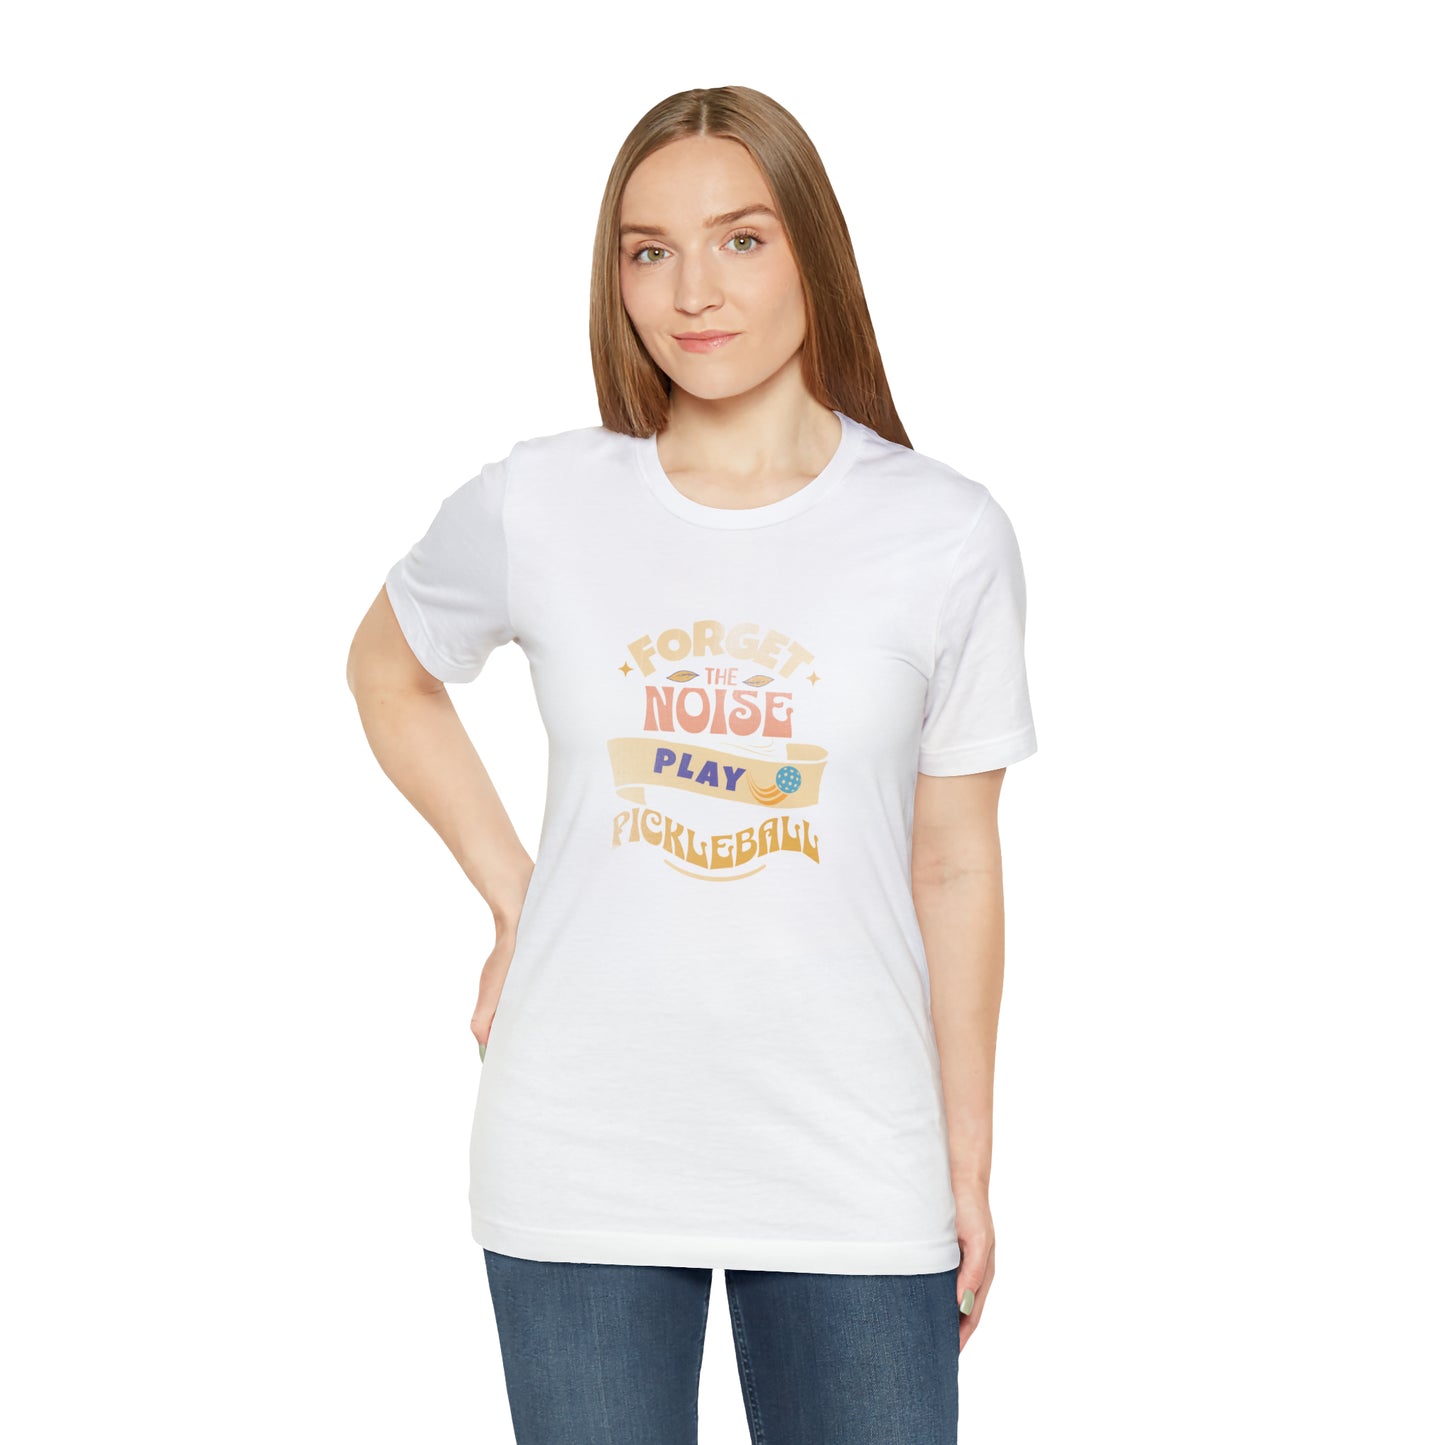 Forget the Noise, Play Pickleball – T-Shirt for Pickleball Lovers